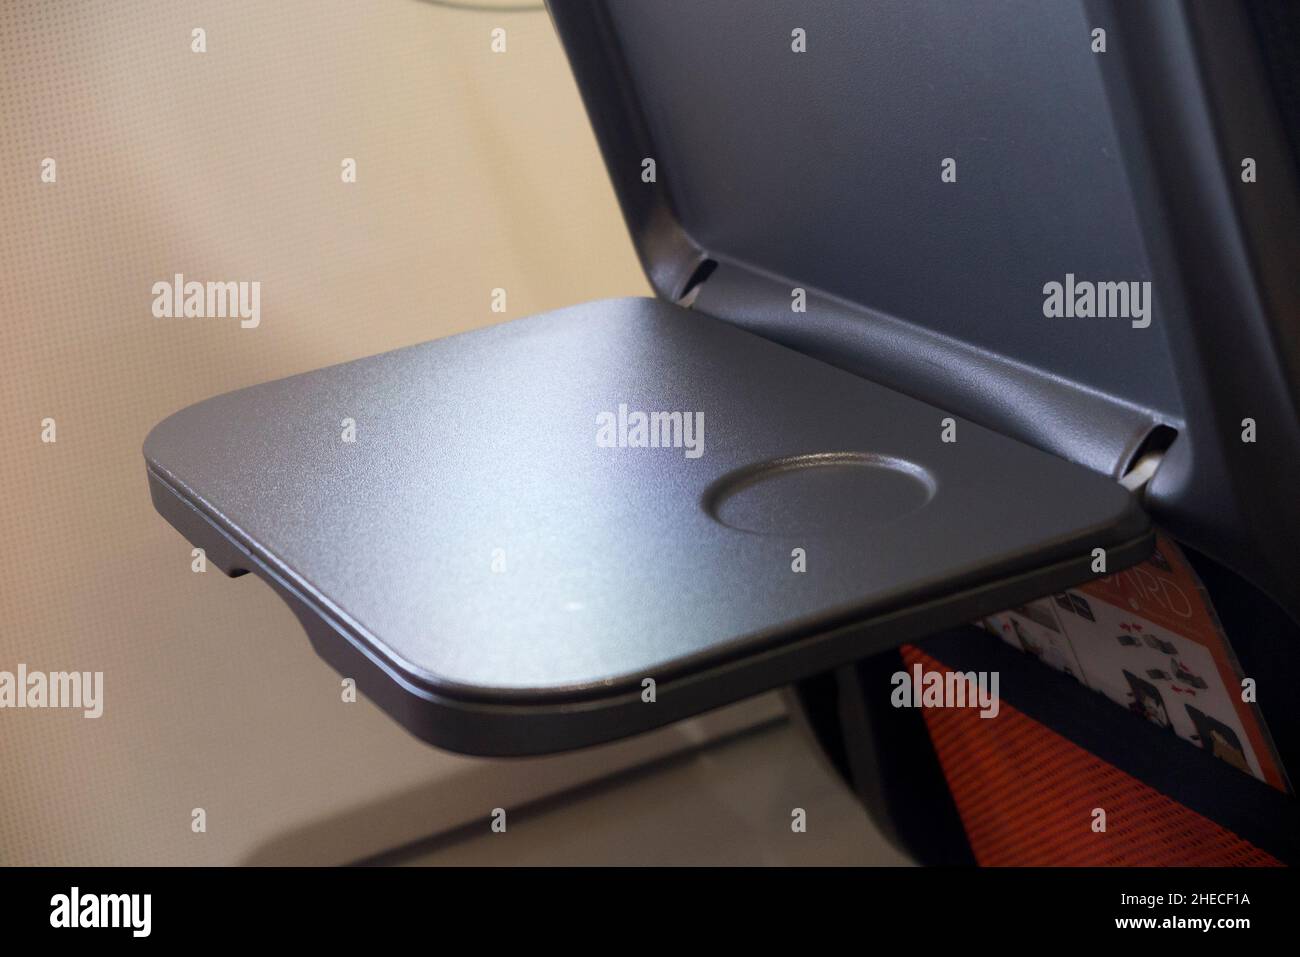 Passenger seat tray table in the full down position ready for use, on an Airbus A320 or A319 plane / airplane aeroplane operated by Easyjet. (128) Stock Photo